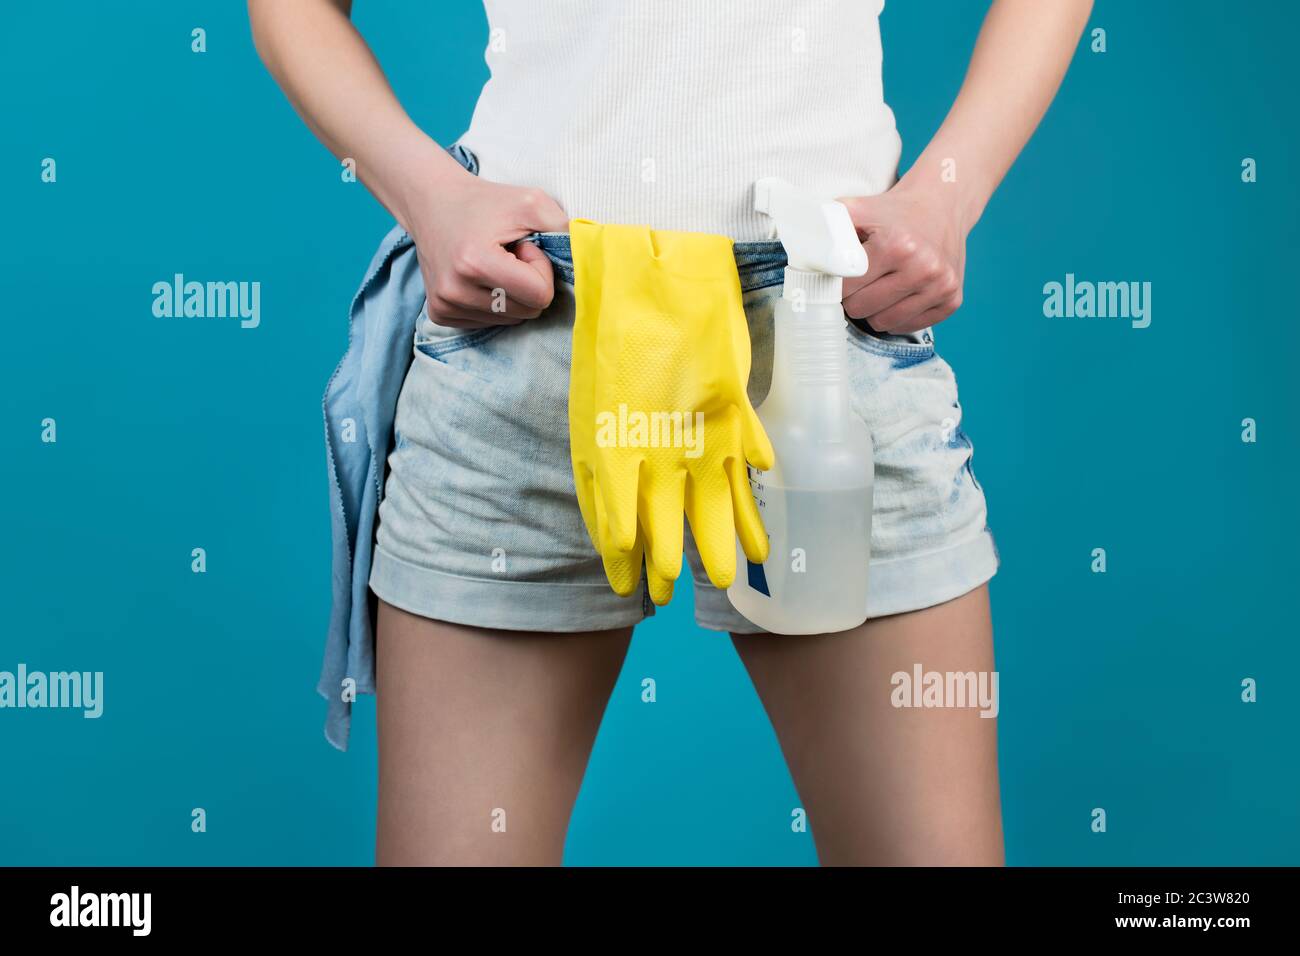 Close-up of a housemaid's jeans along with a sprayer, gloves and a rag Stock Photo